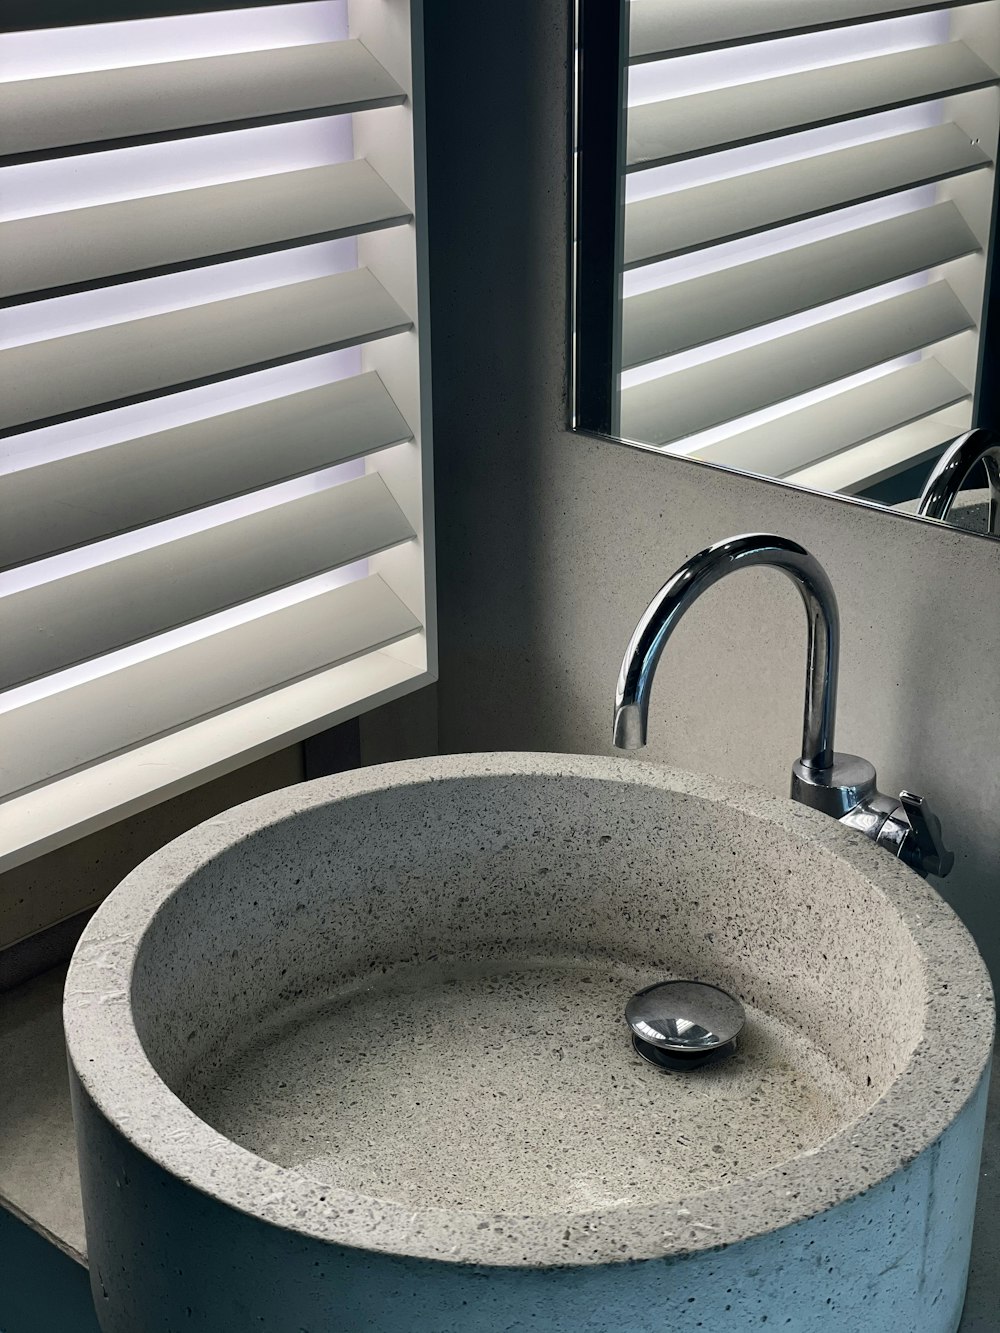 stainless steel faucet near window blinds